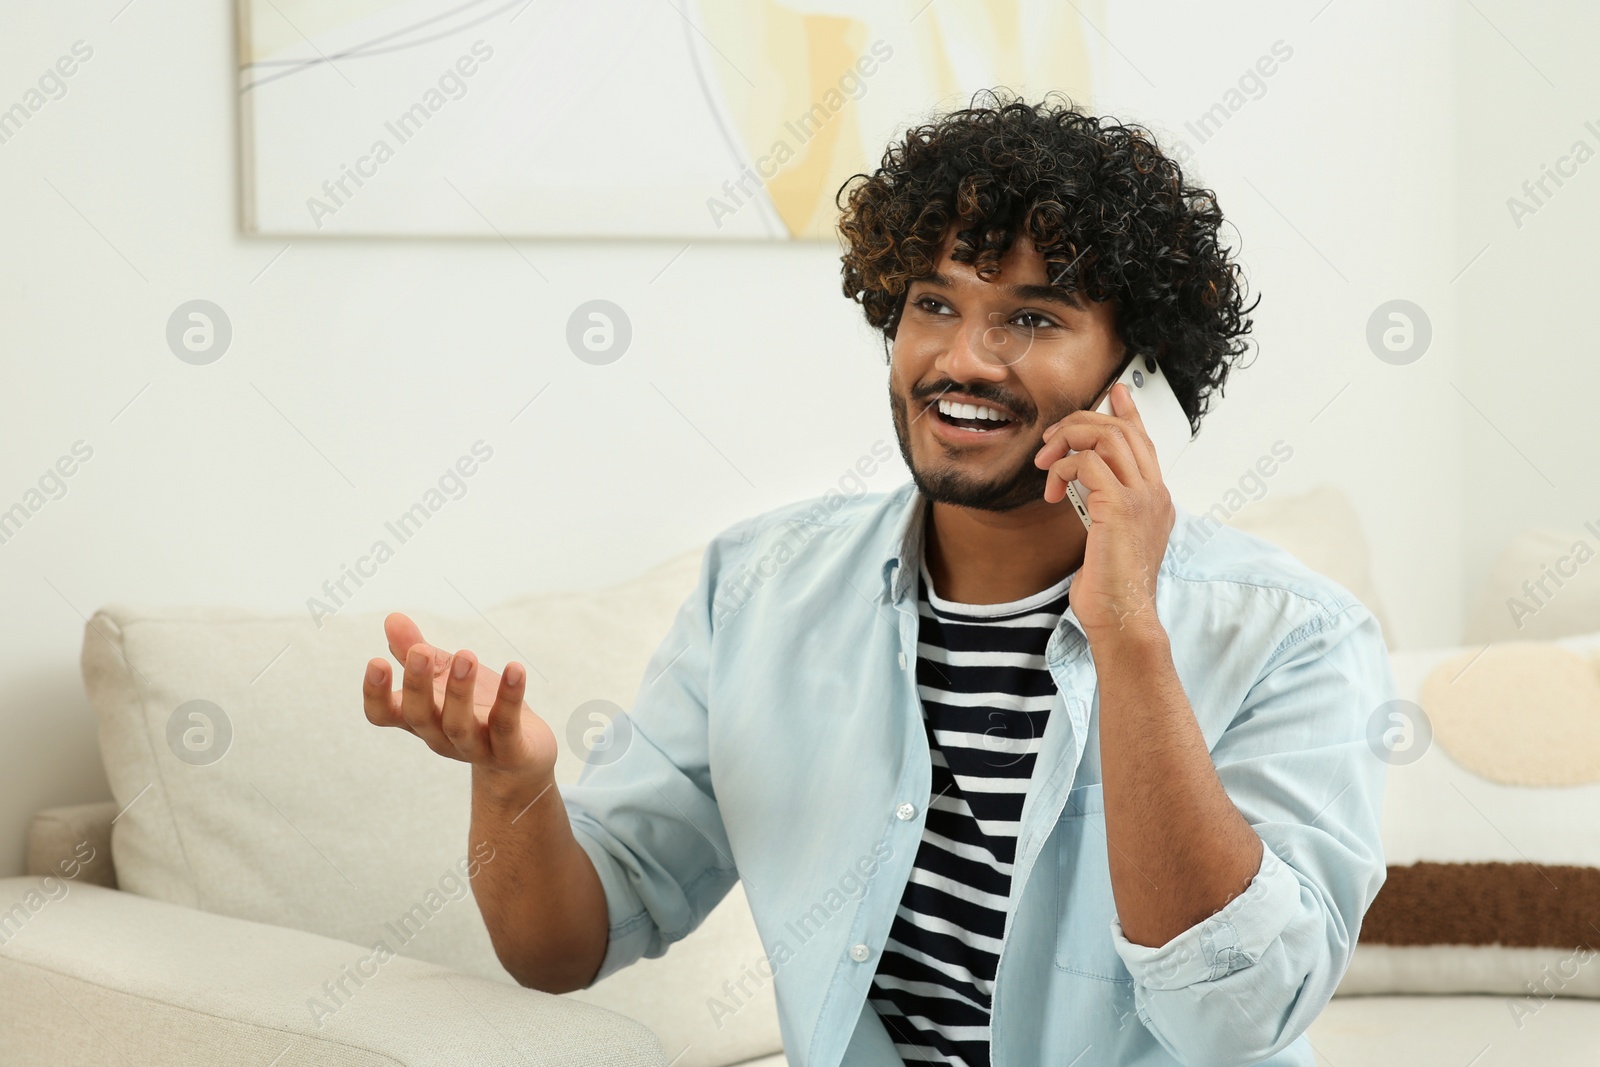 Photo of Handsome smiling man taking on smartphone in room